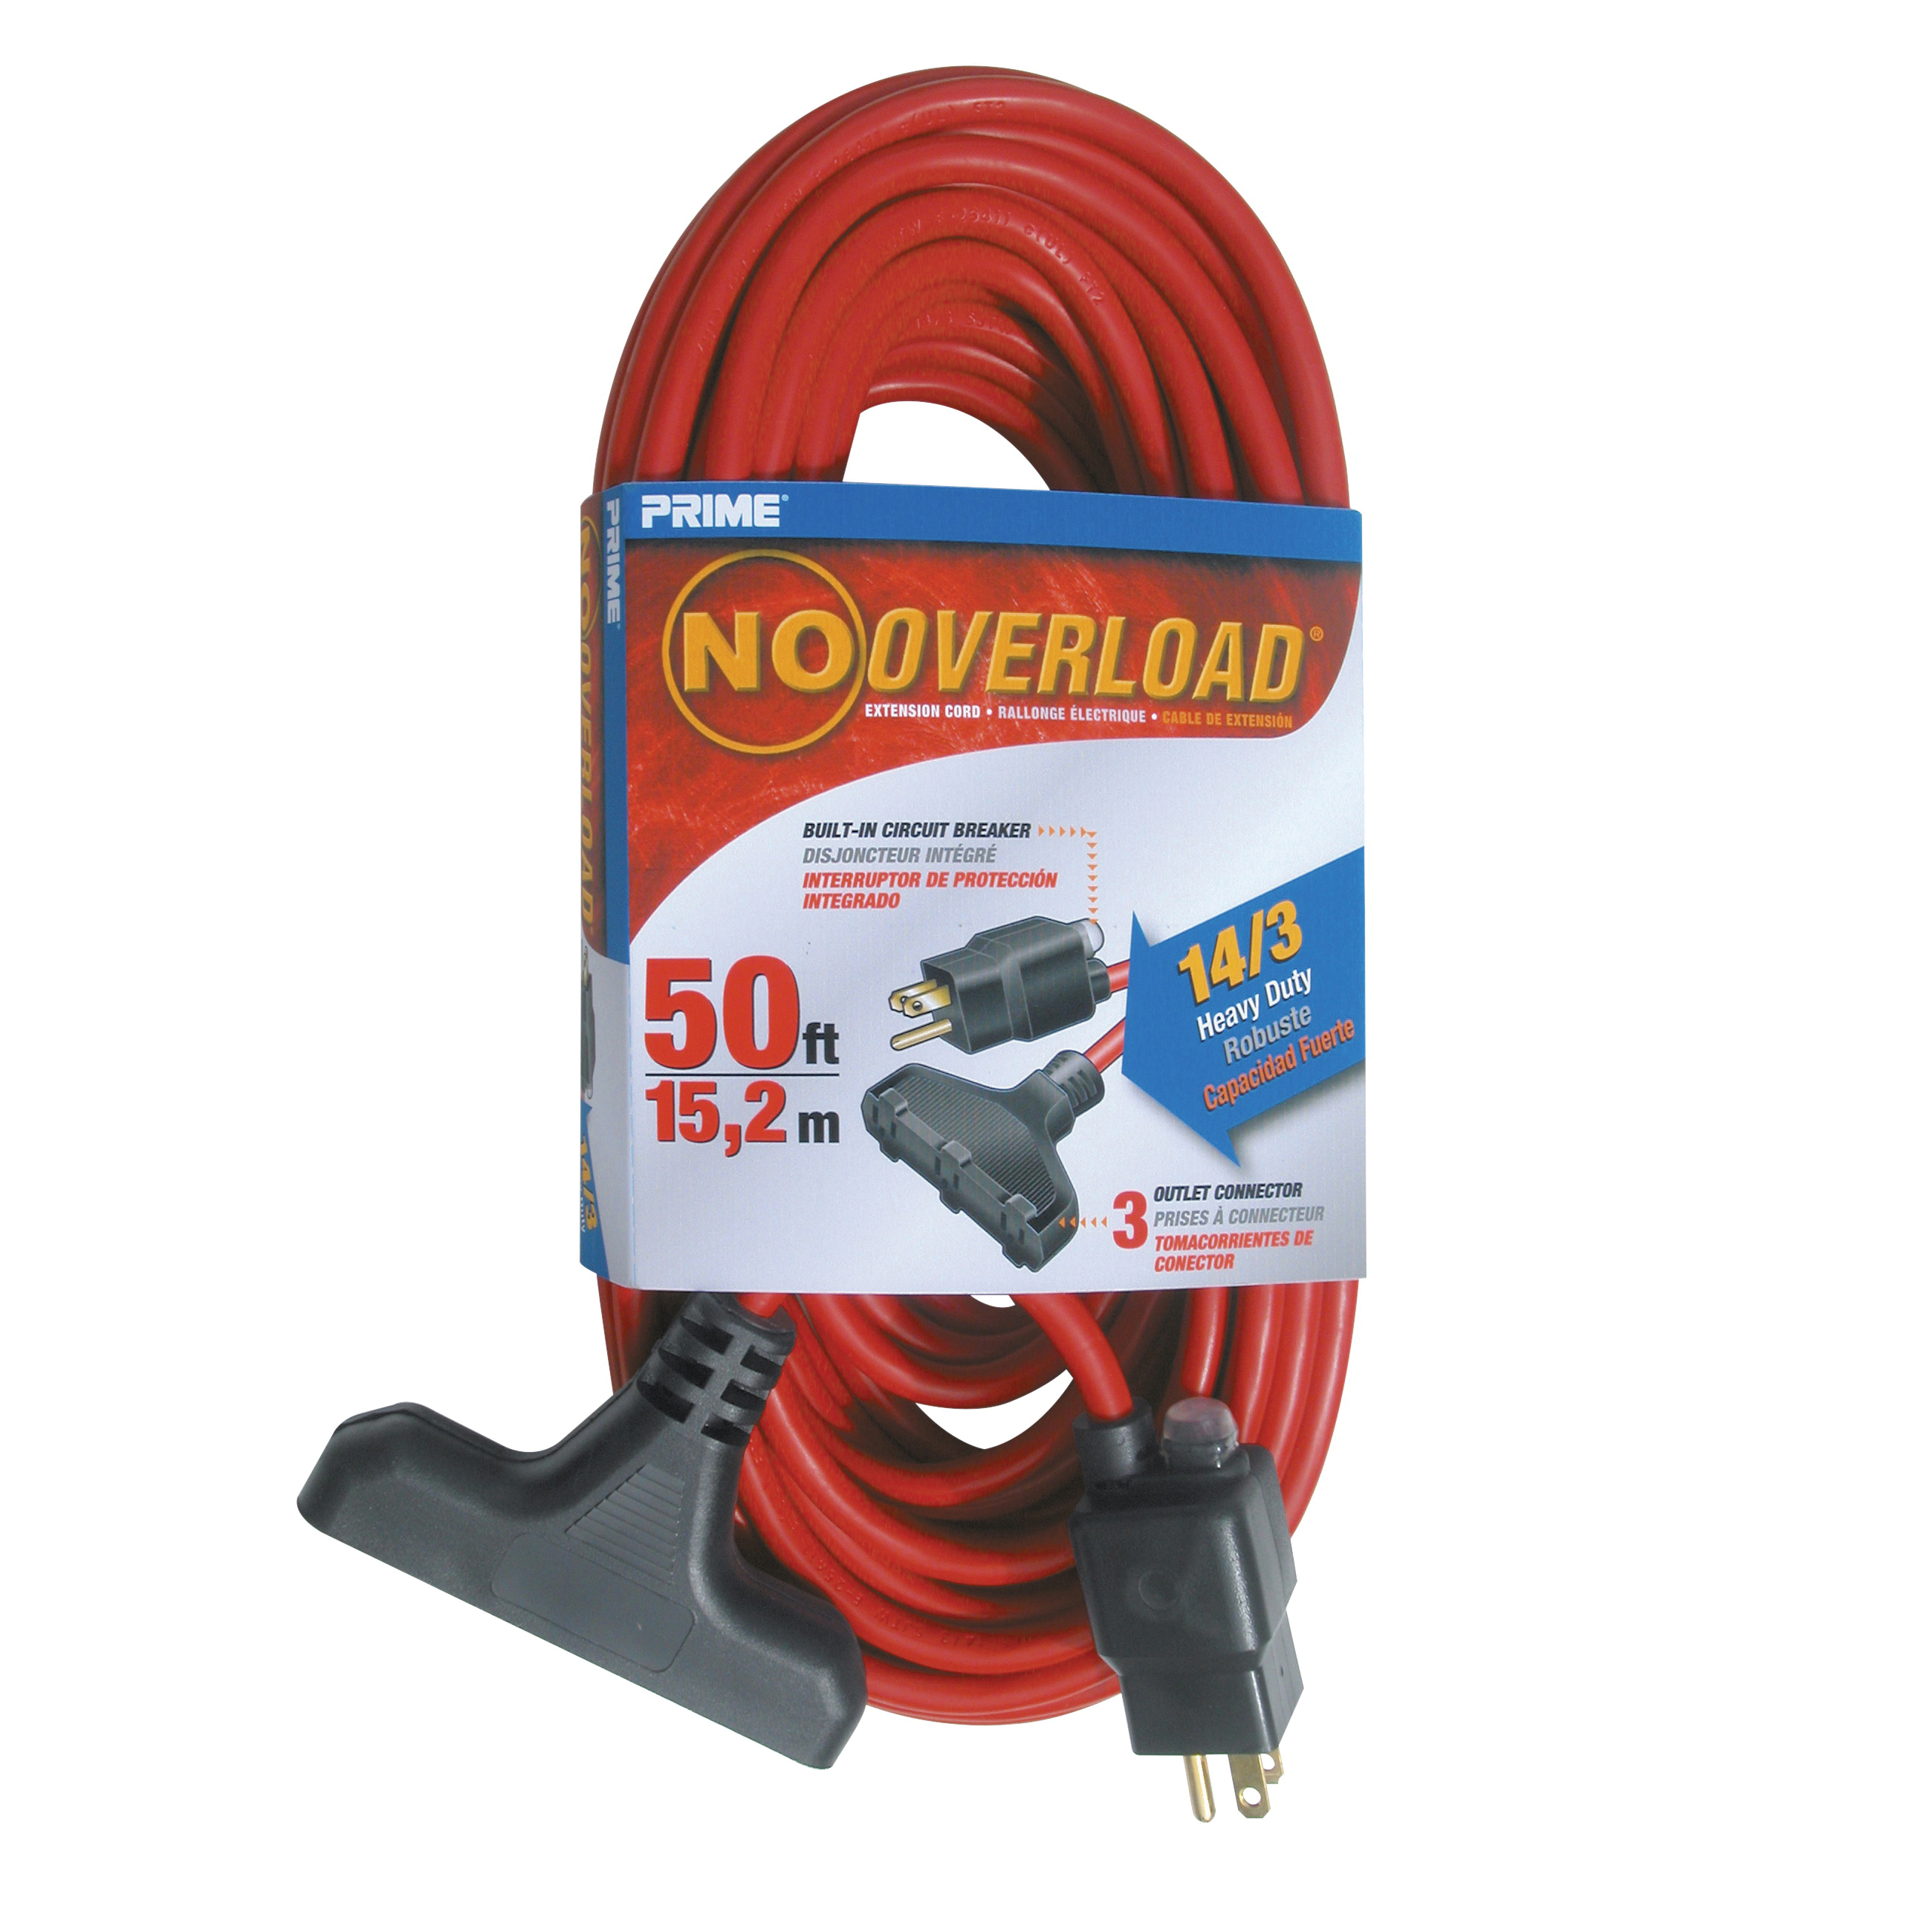 Prime CB614730 Extension Cord, 50 ft L, 15 A, 125 V, Red - 1